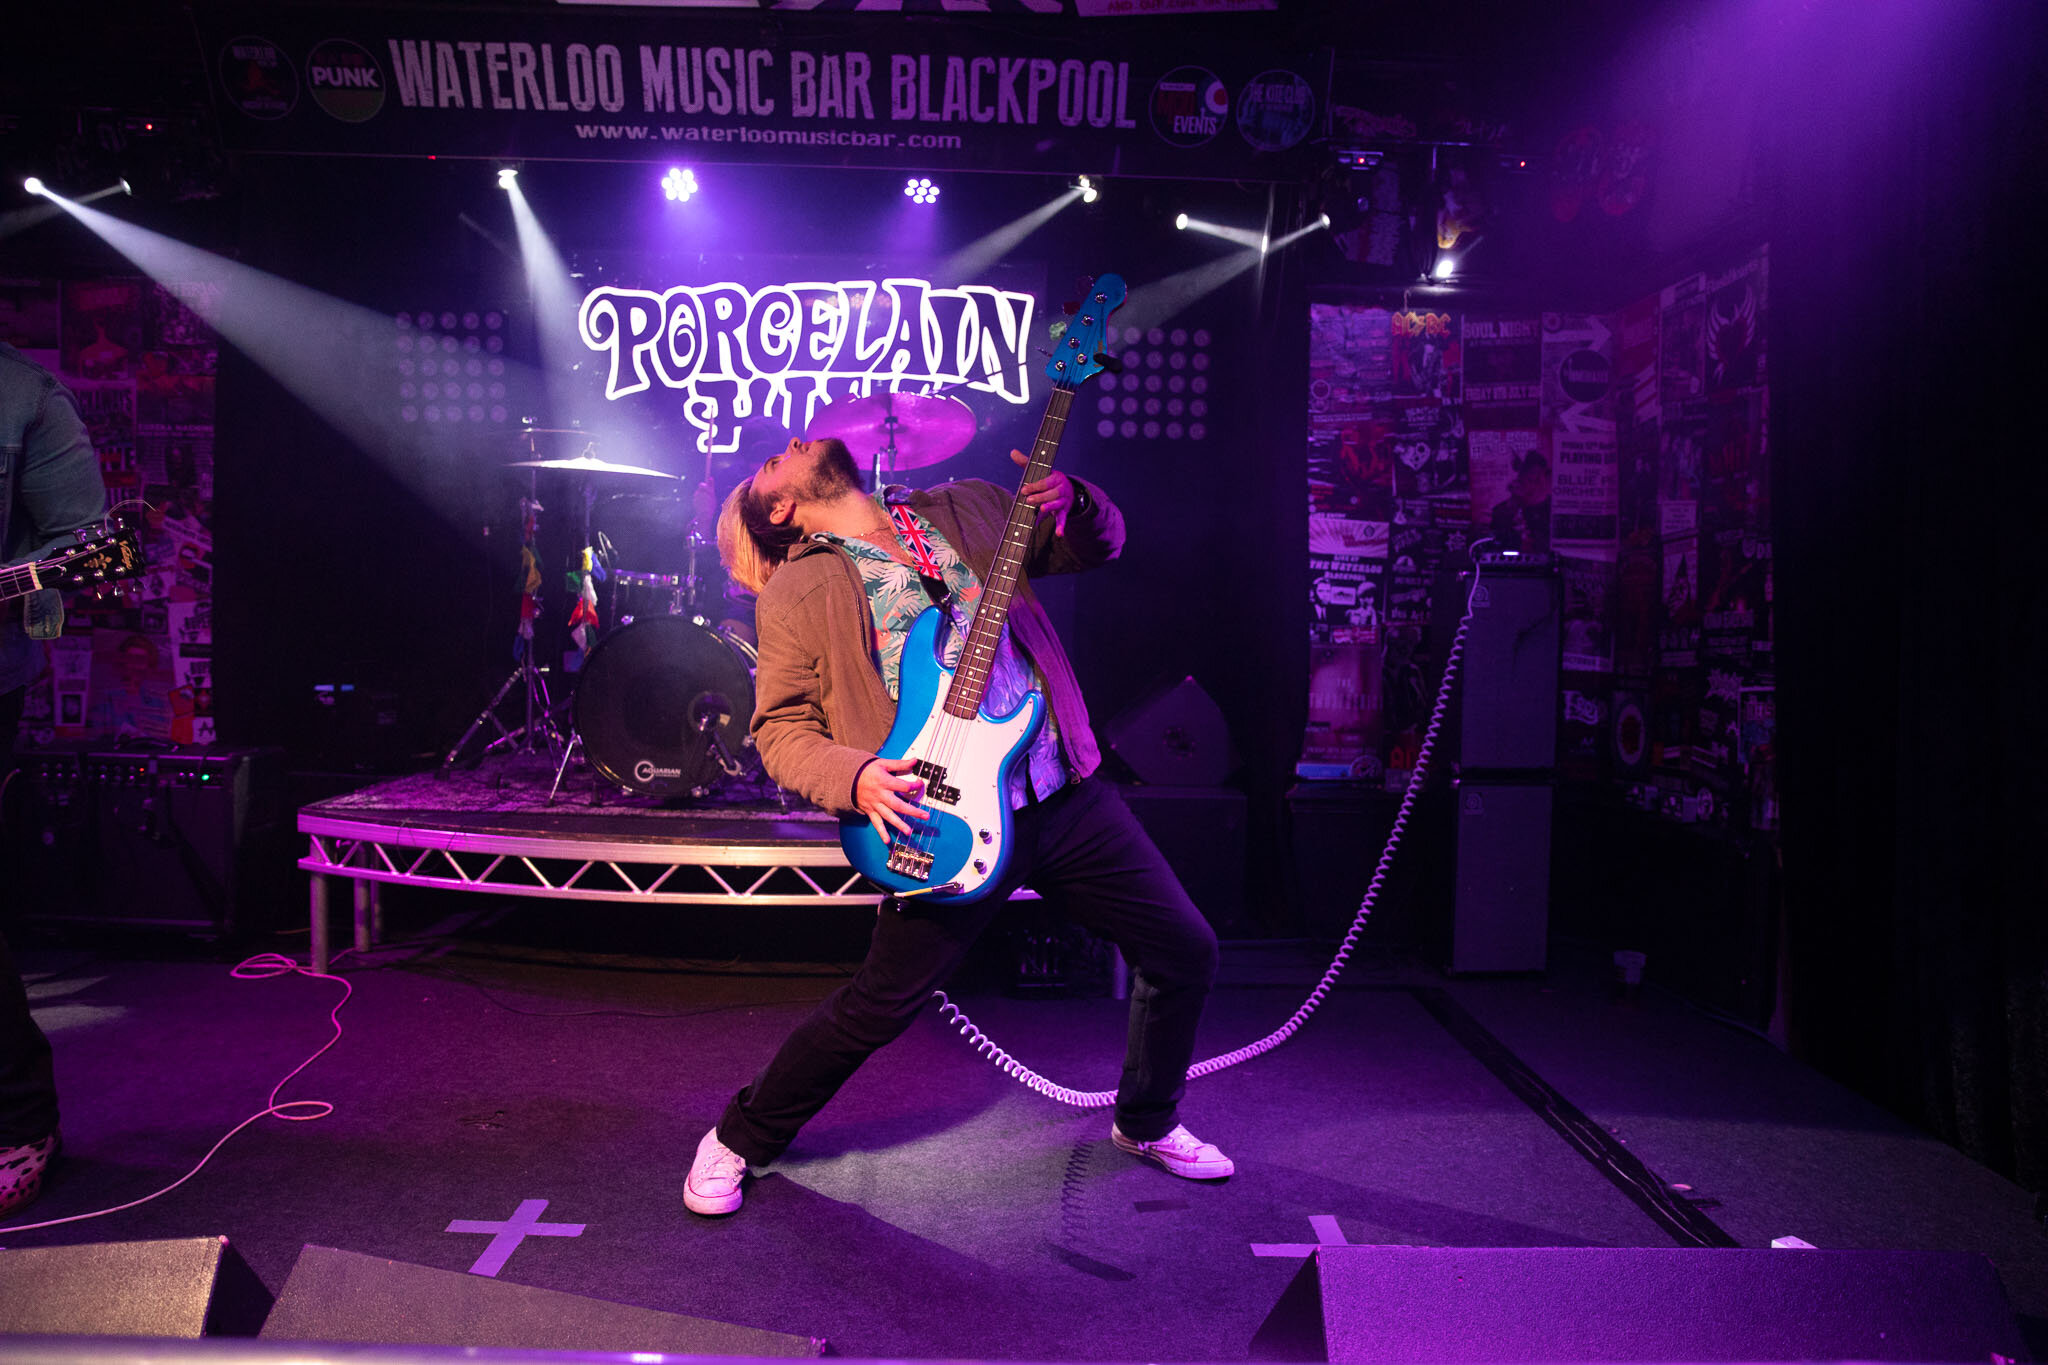 Porcelaine Hill at The Waterloo Music Bar in Blackpool on Septem